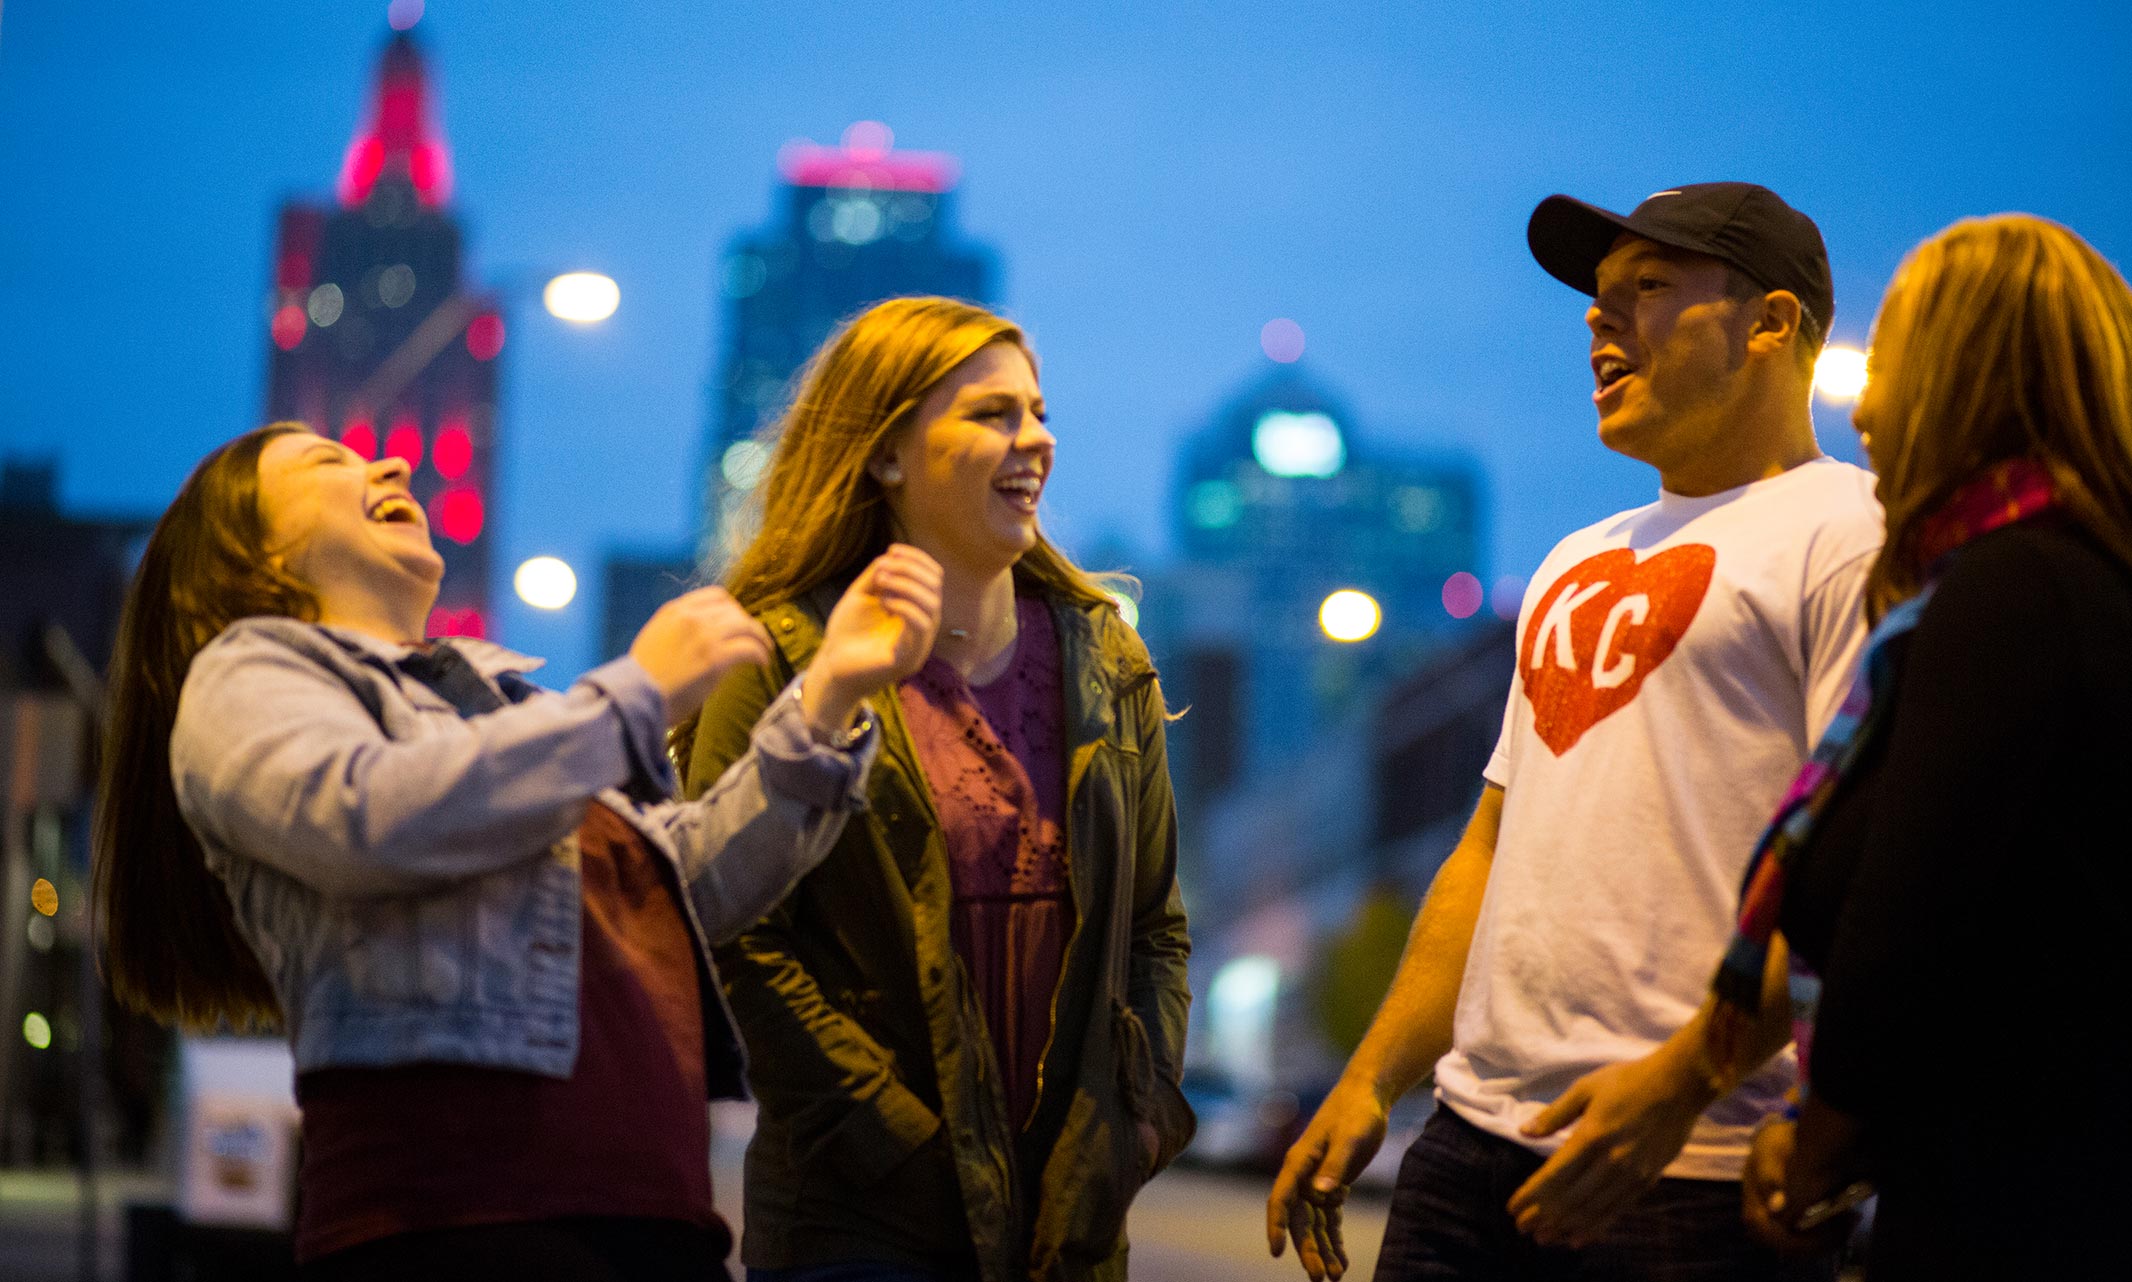 Four people having a joyful conversation with Kansas City skyline in the background